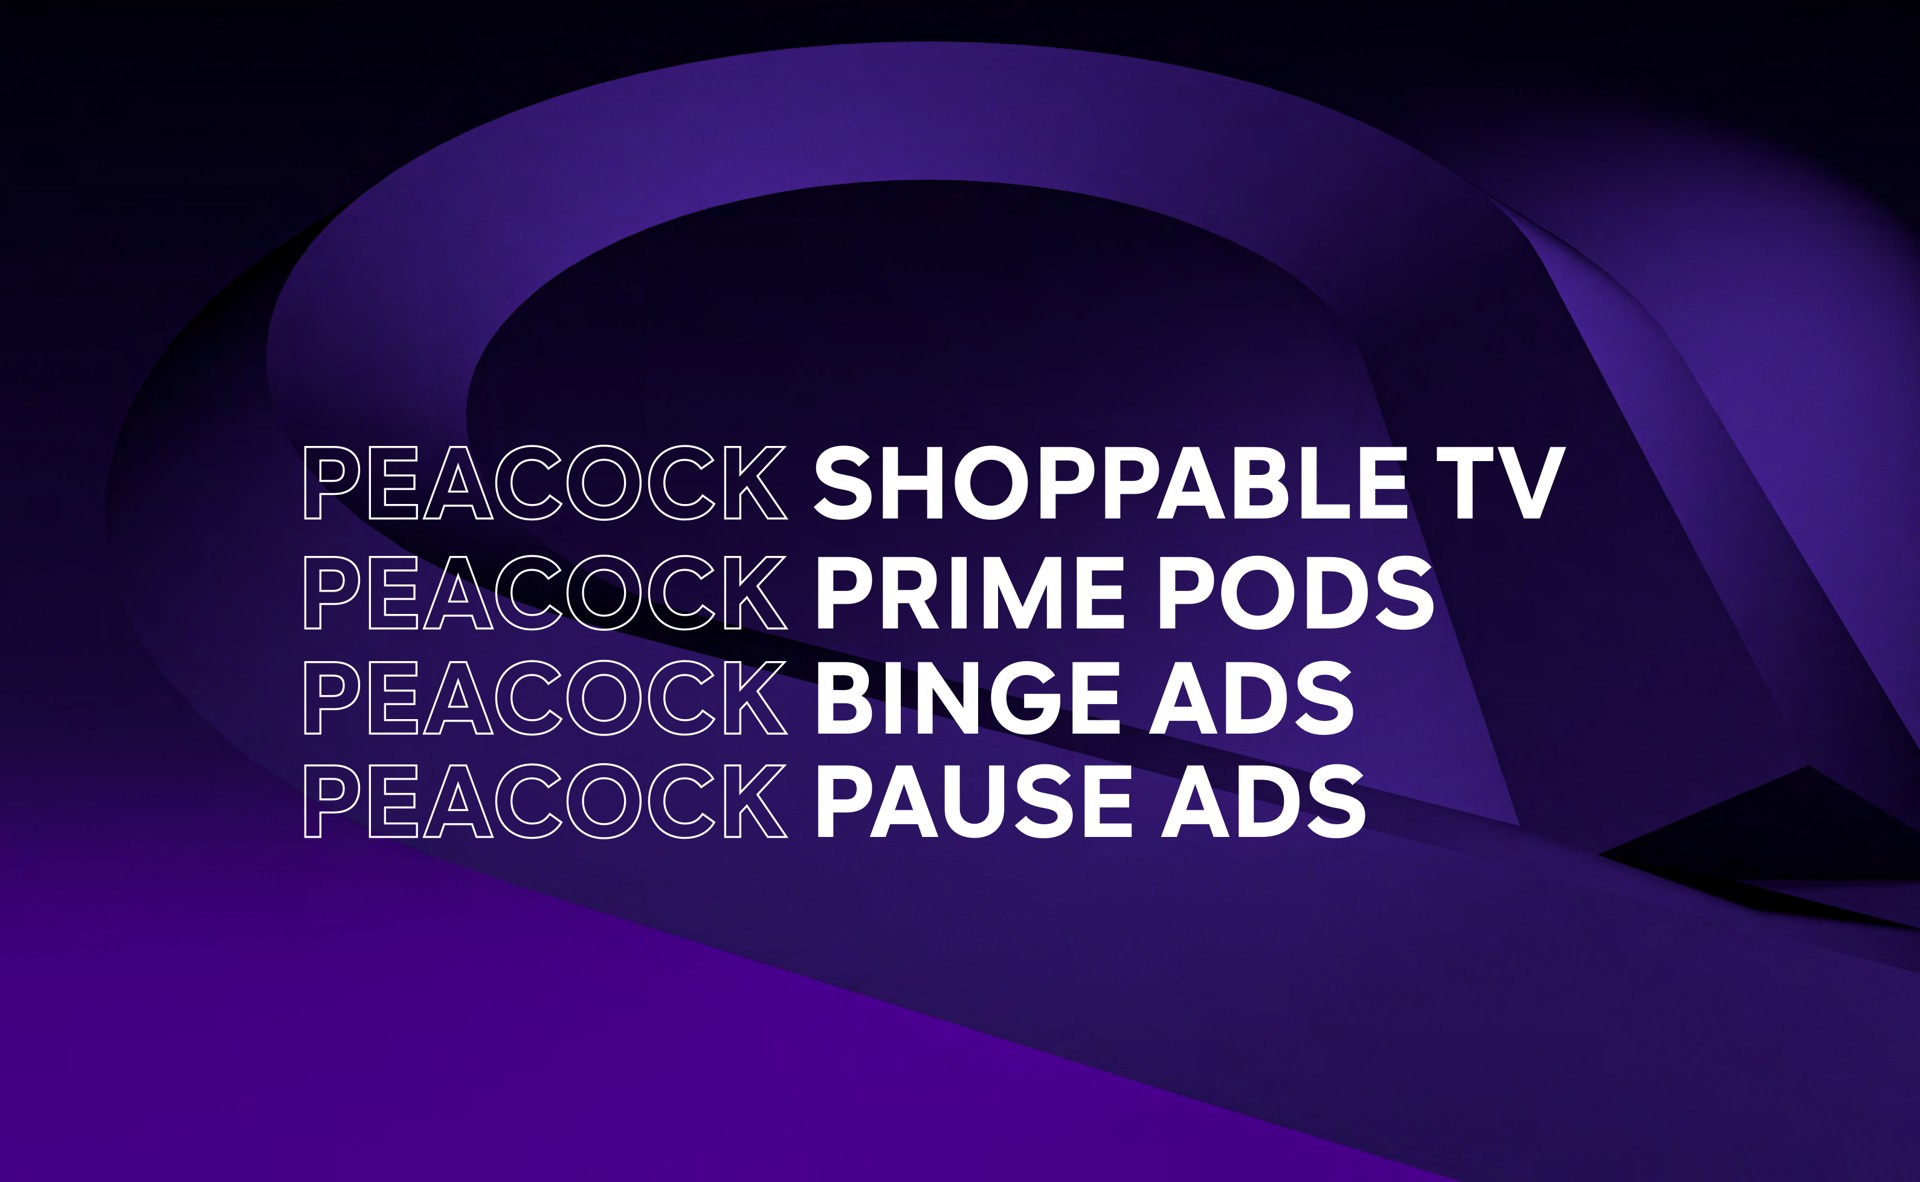 peacock peacock prime pods peacock binge ads peacock pause ads a | Comcast